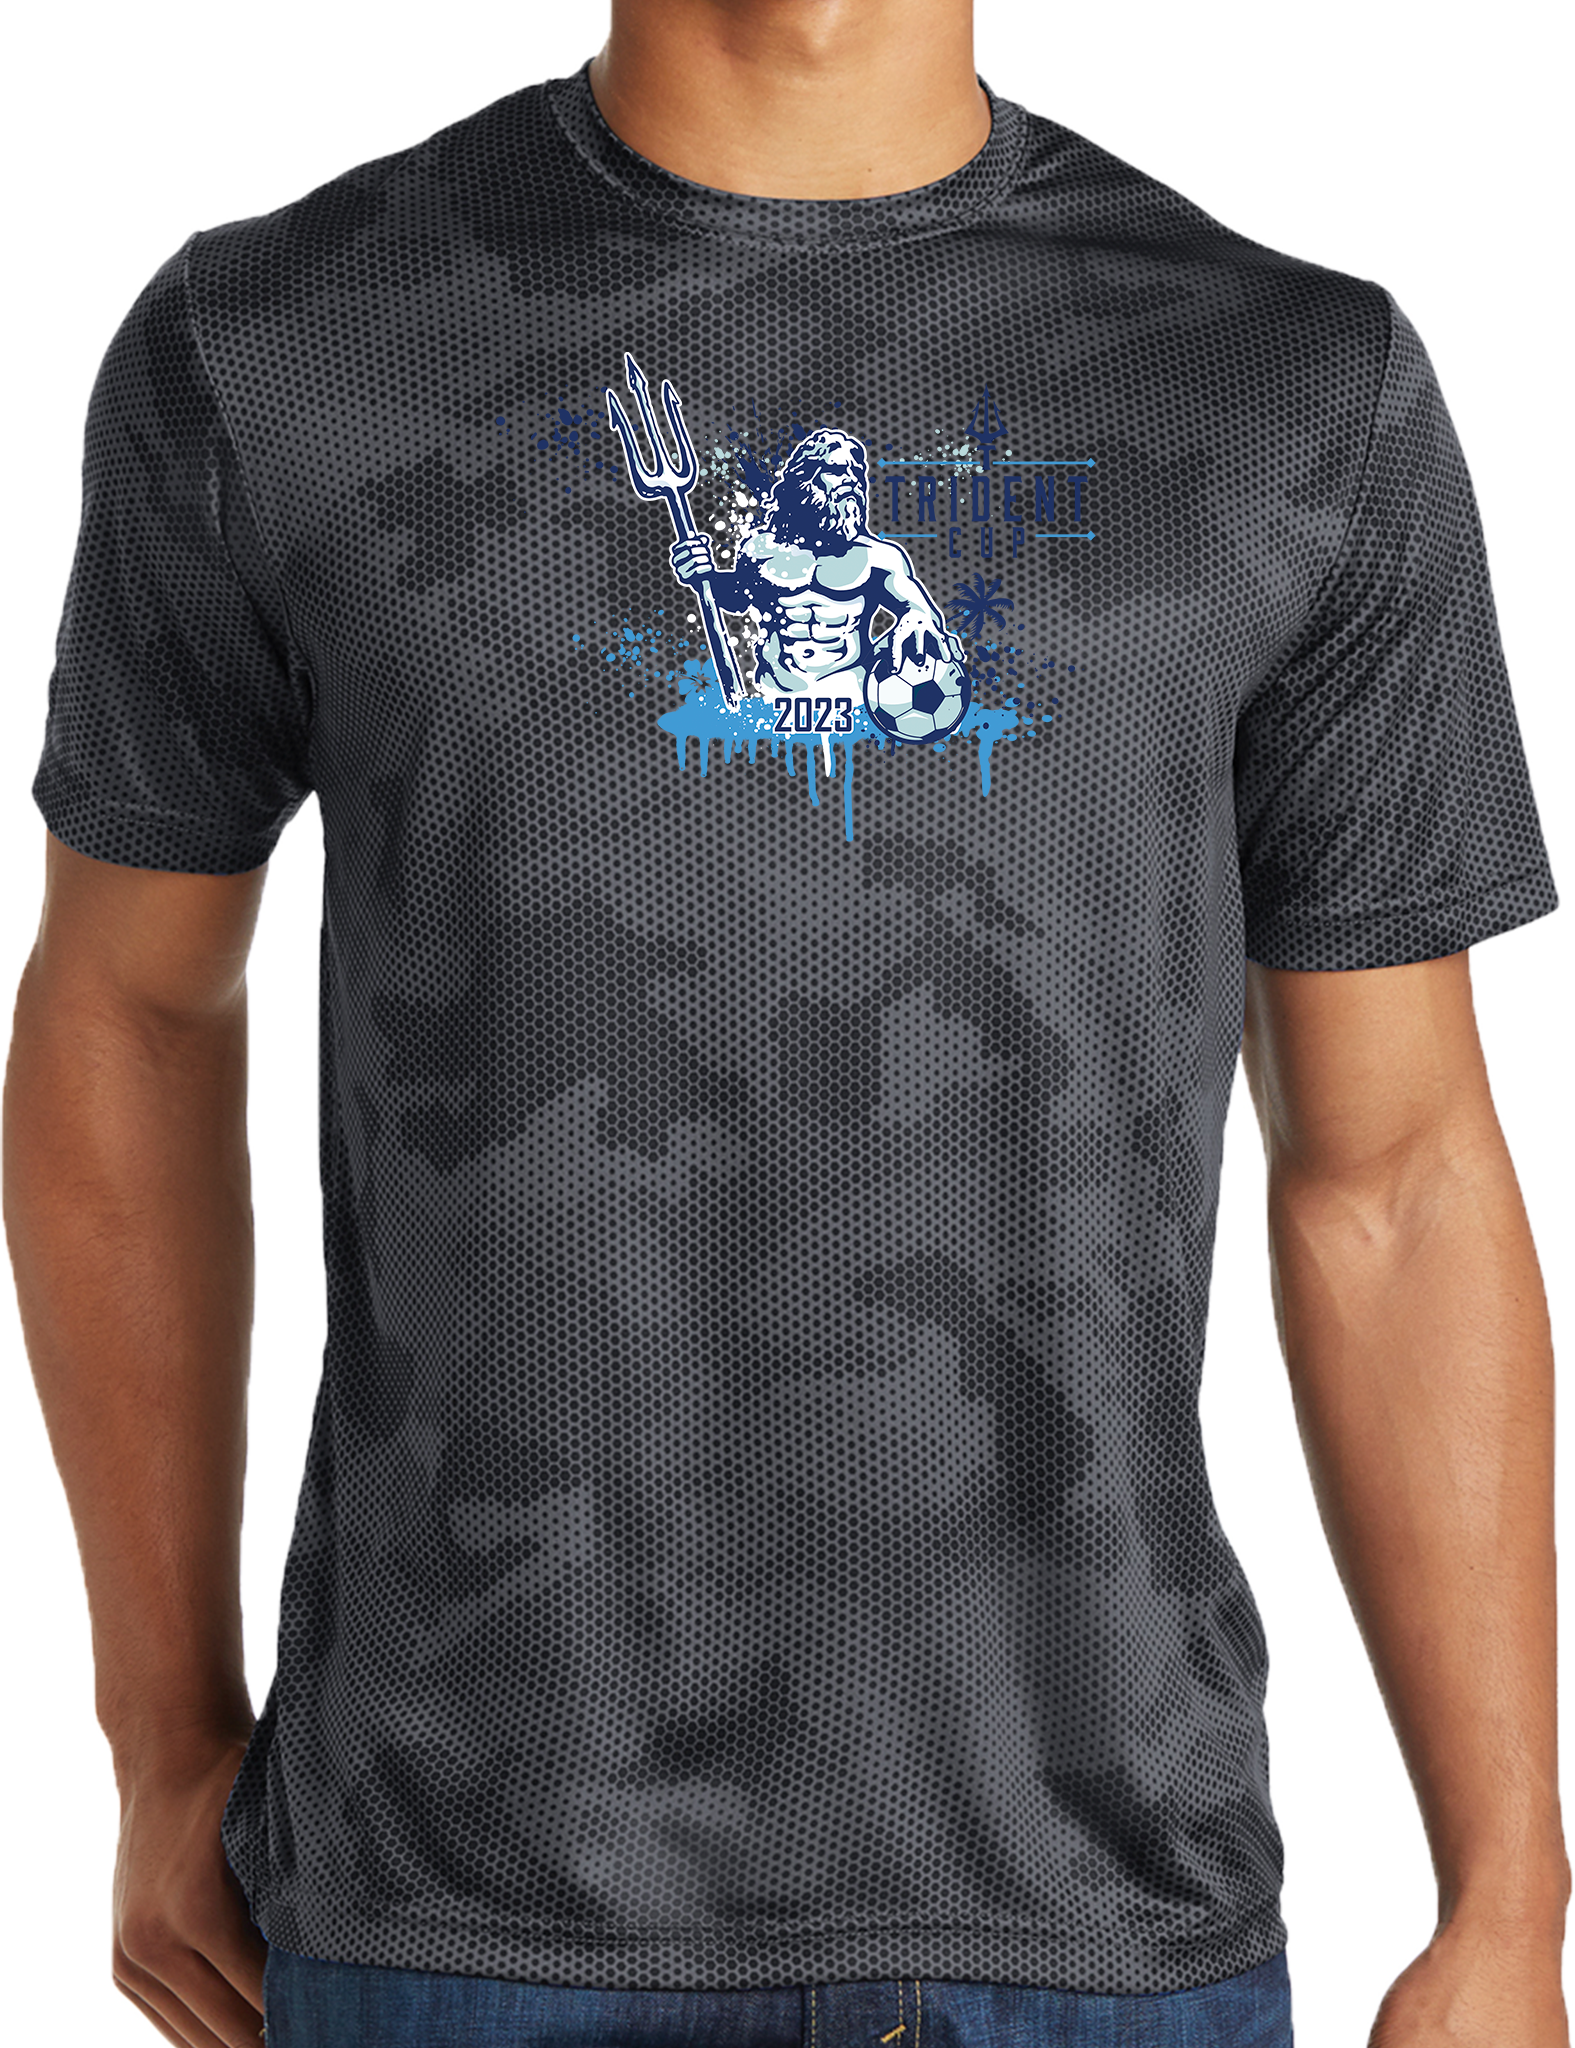 PERFORMANCE SHIRTS - 2023 Trident Cup